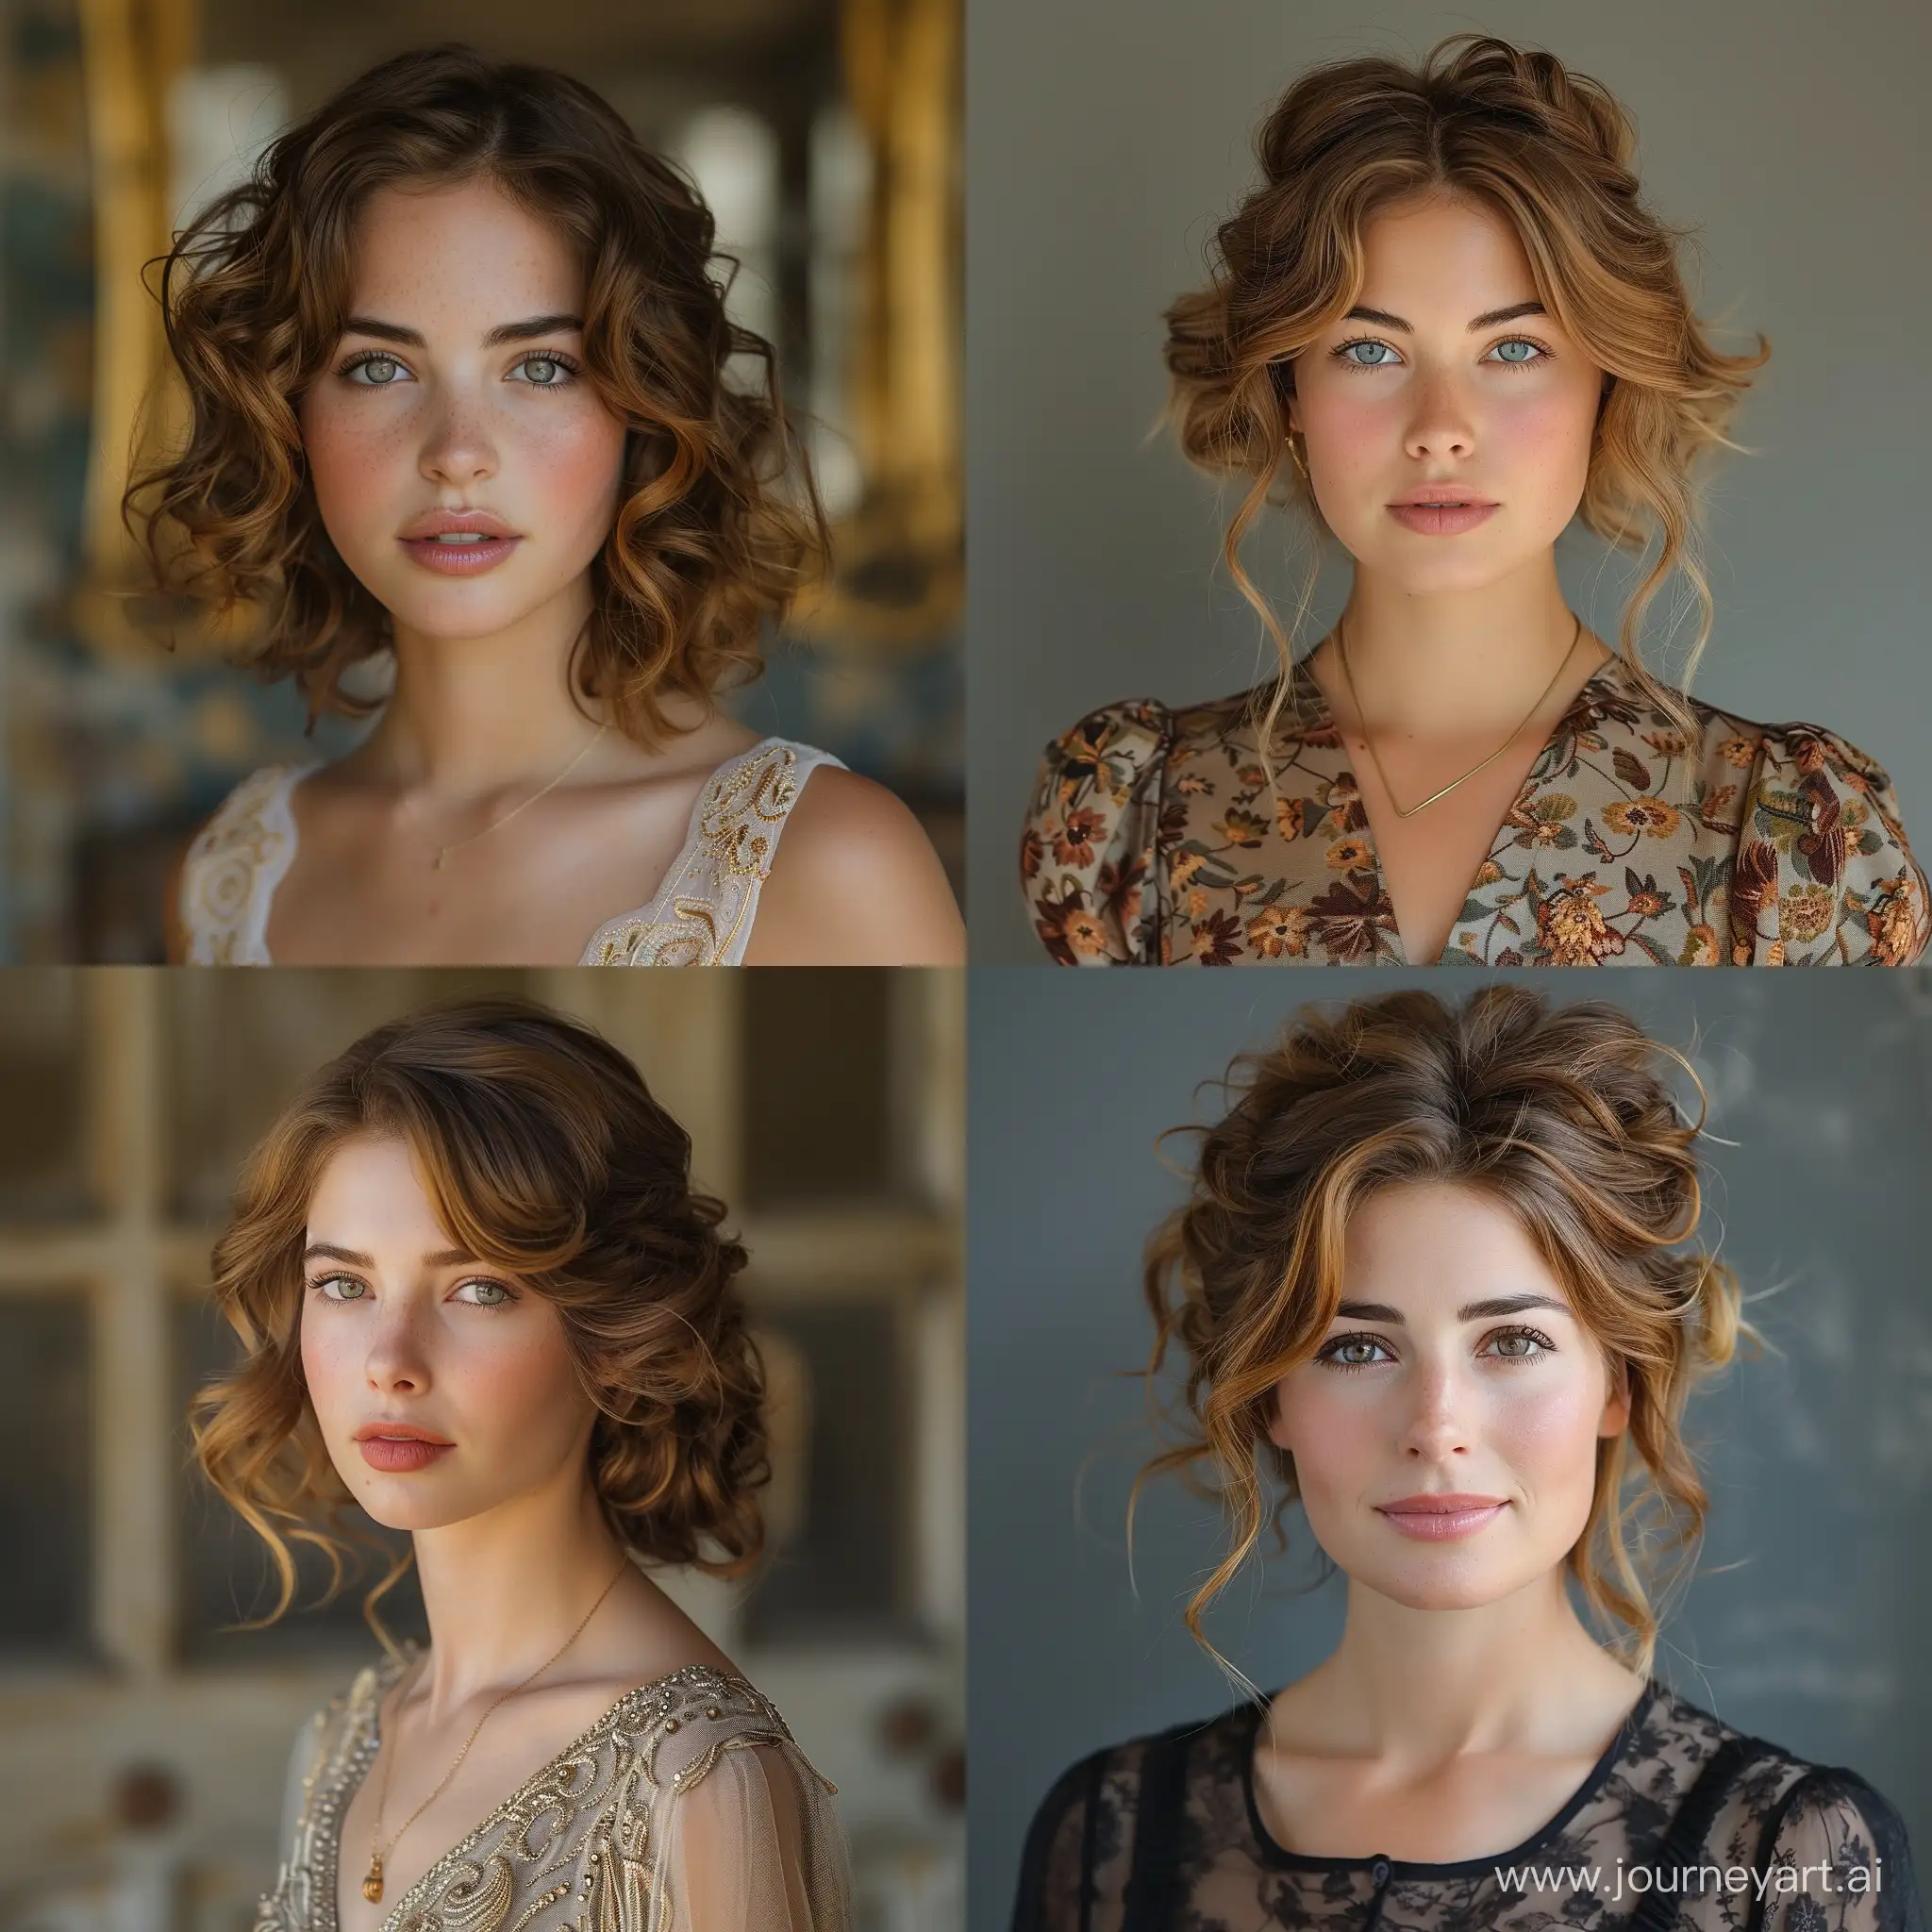 Portrait-of-a-Woman-in-her-20s-with-Updo-Hairstyle-and-Warm-Undertones